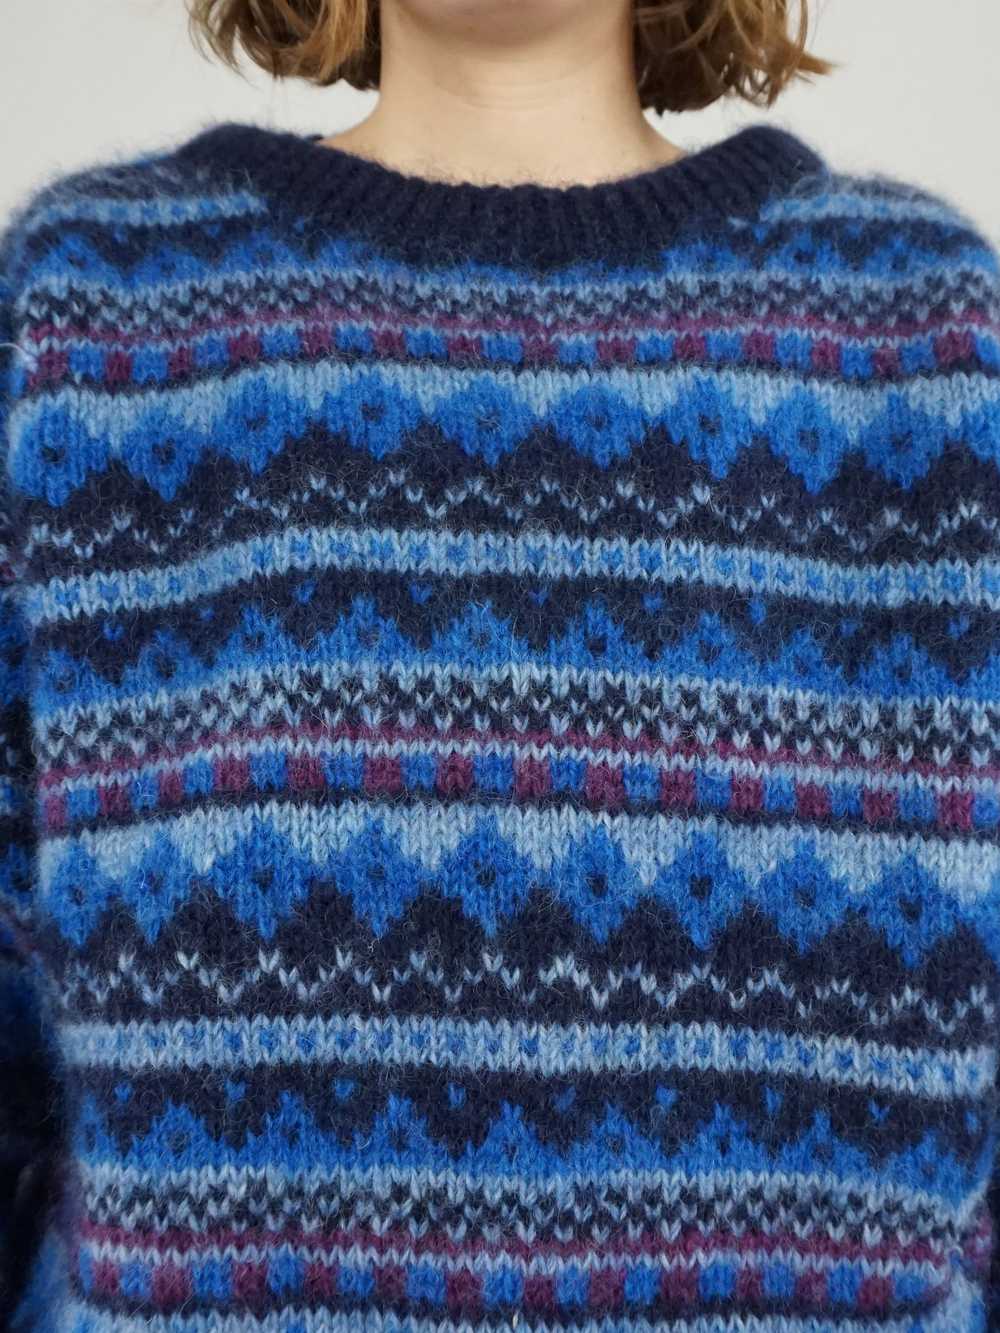 Chunky Wool Patterned Jumper - XL - image 3